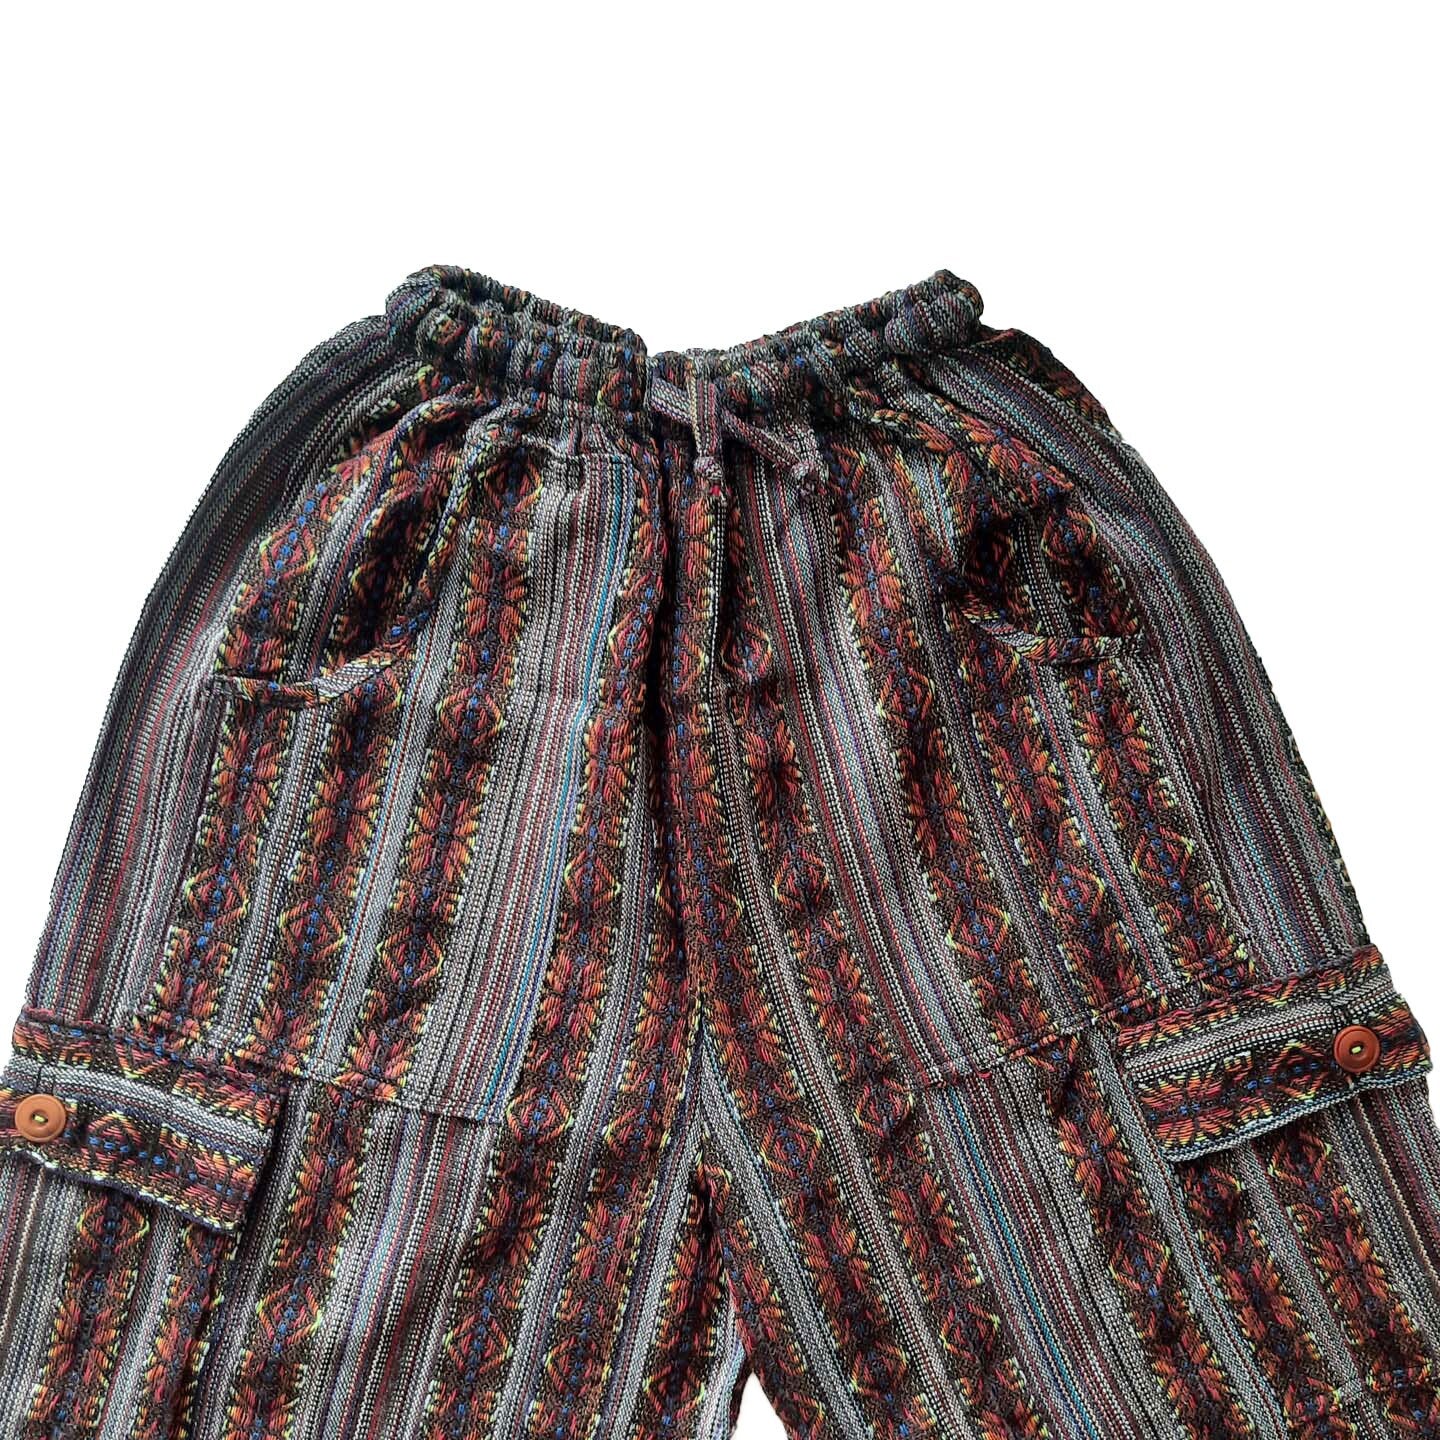 Shorts Size 2XL | Hippie Shorts | Lounge Wear | Mens Cargo Shorts | Brown Colorful